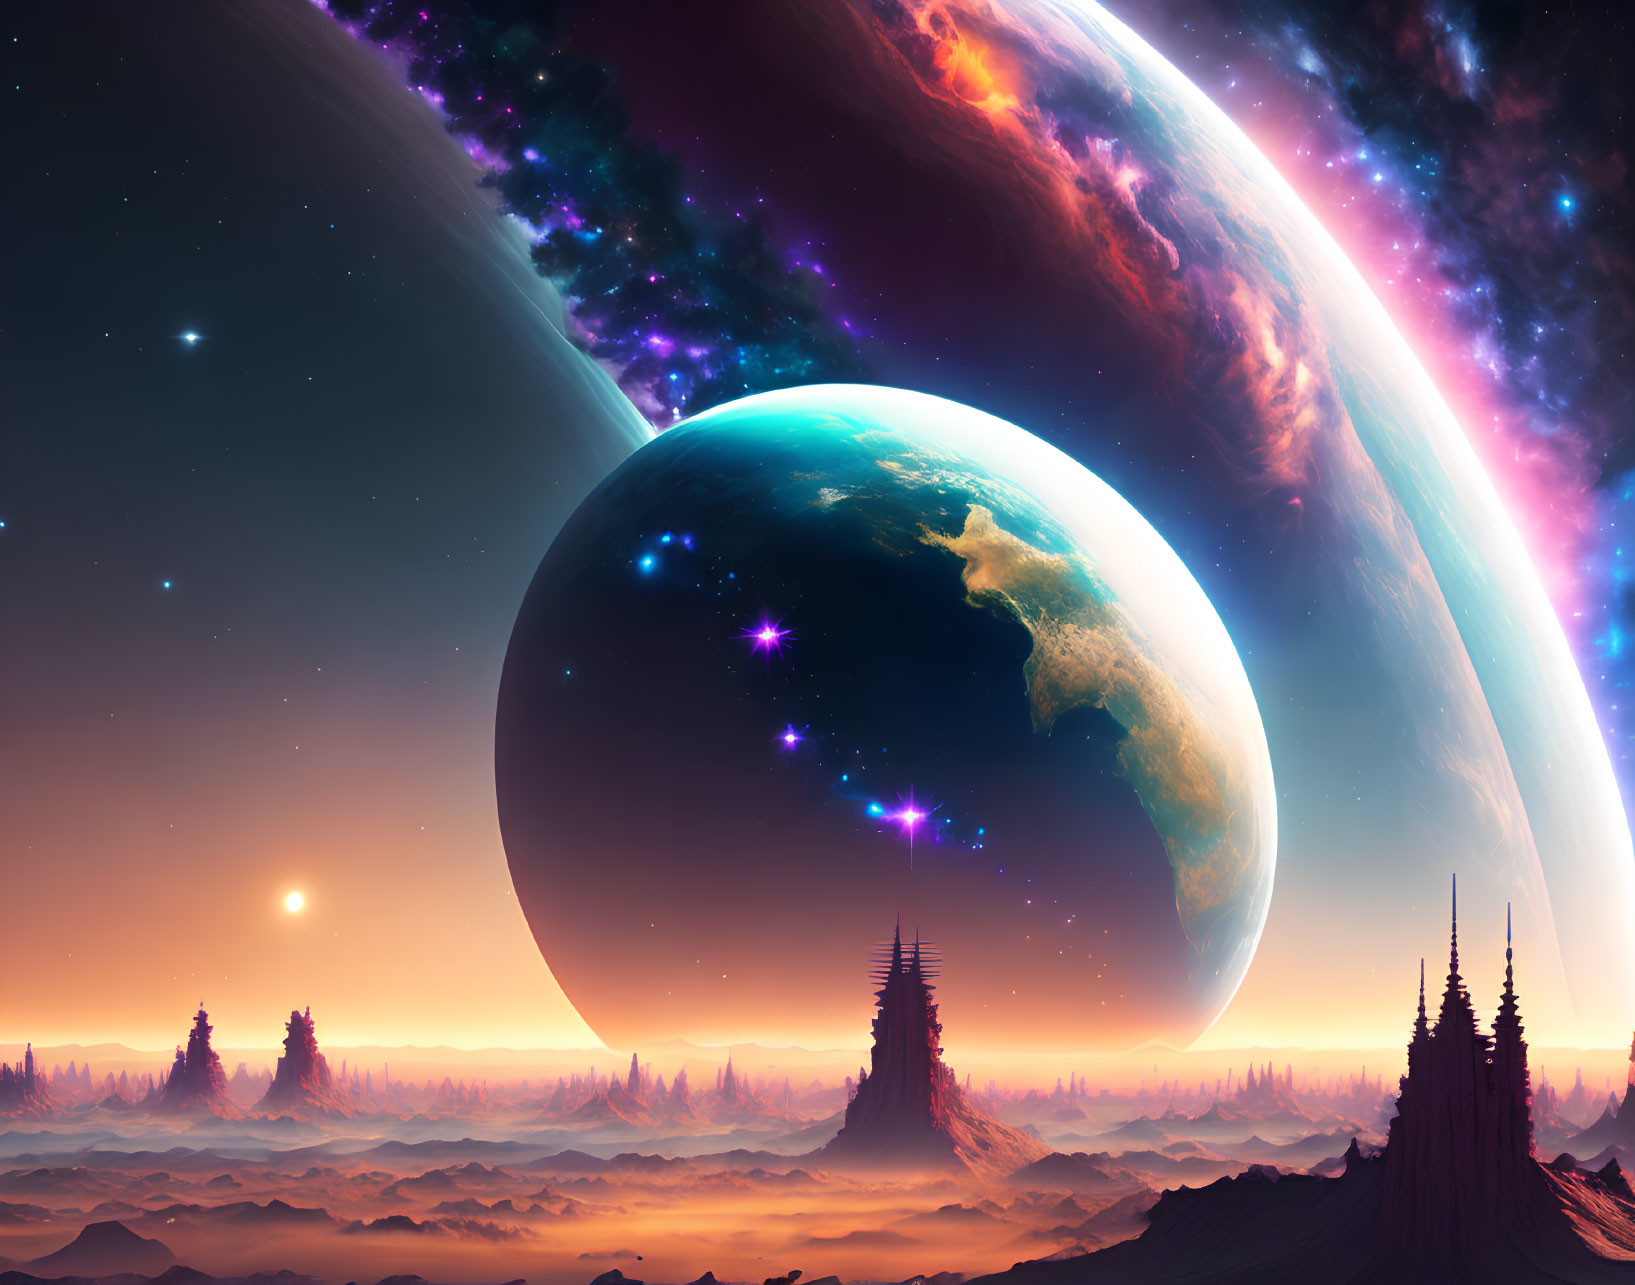 Colorful sci-fi landscape with multiple planets and alien terrain under a starry sky.